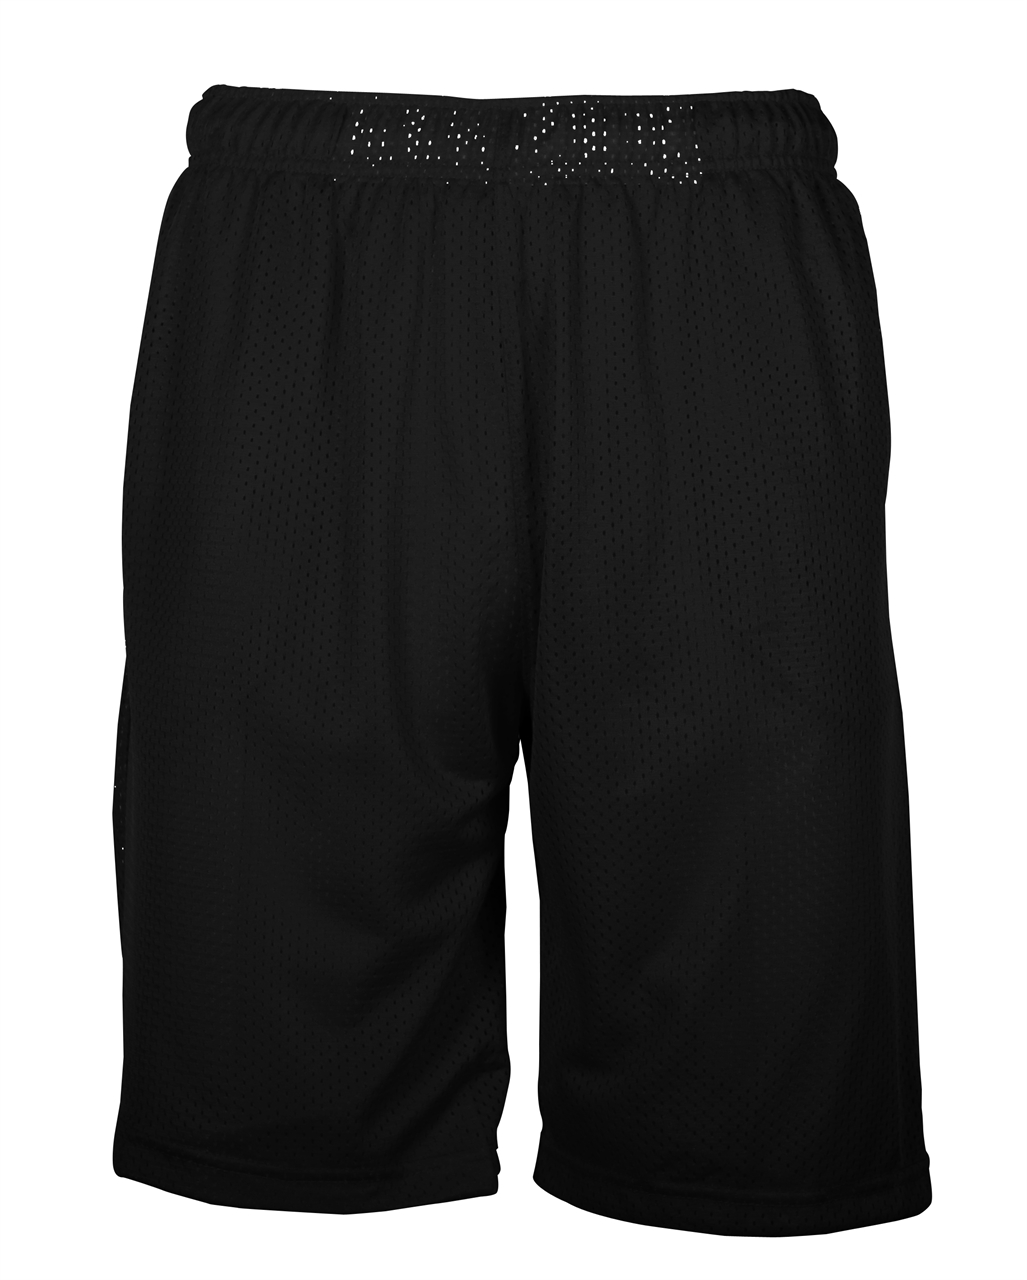 Picture of N3 Sport Mesh Short